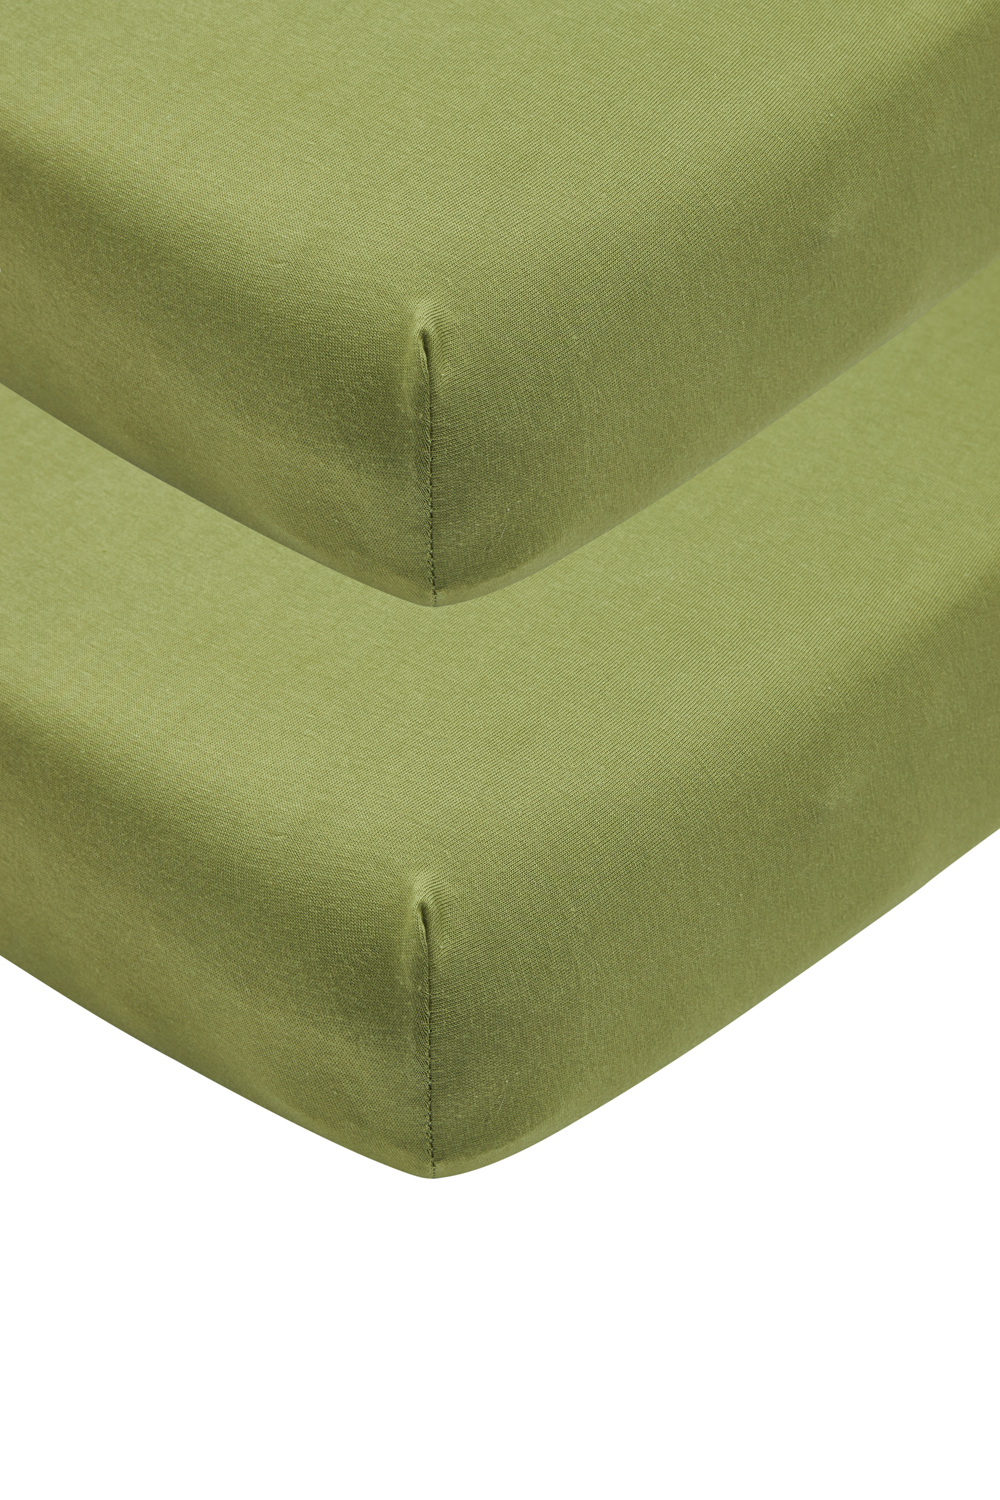 Jersey Fitted Sheet 2-Pack - Avocado - 70X140/150cm